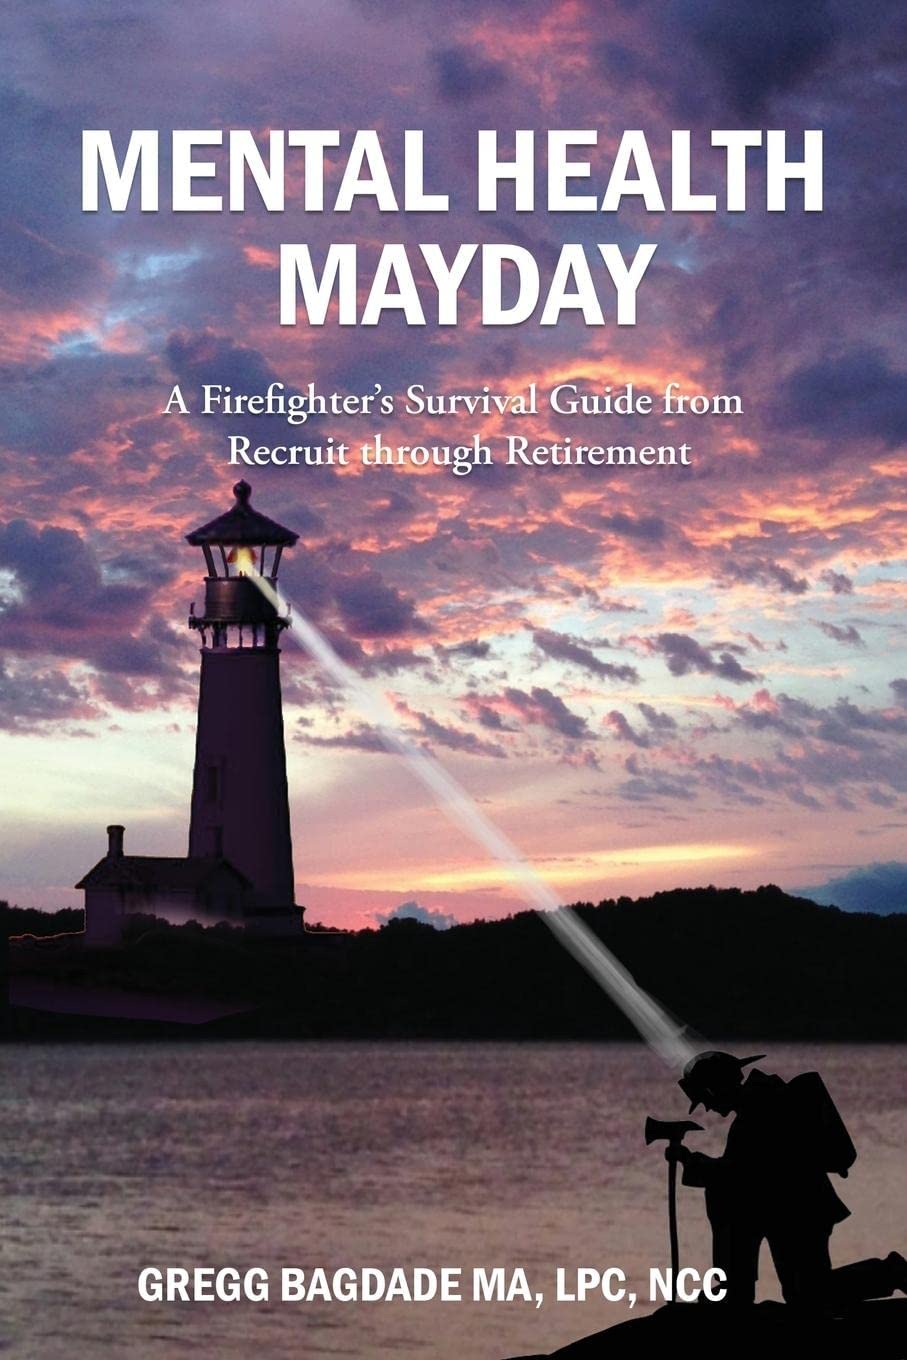 Mental Health Mayday: A Firefighter’s Survival Guide from Recruit through Retirement